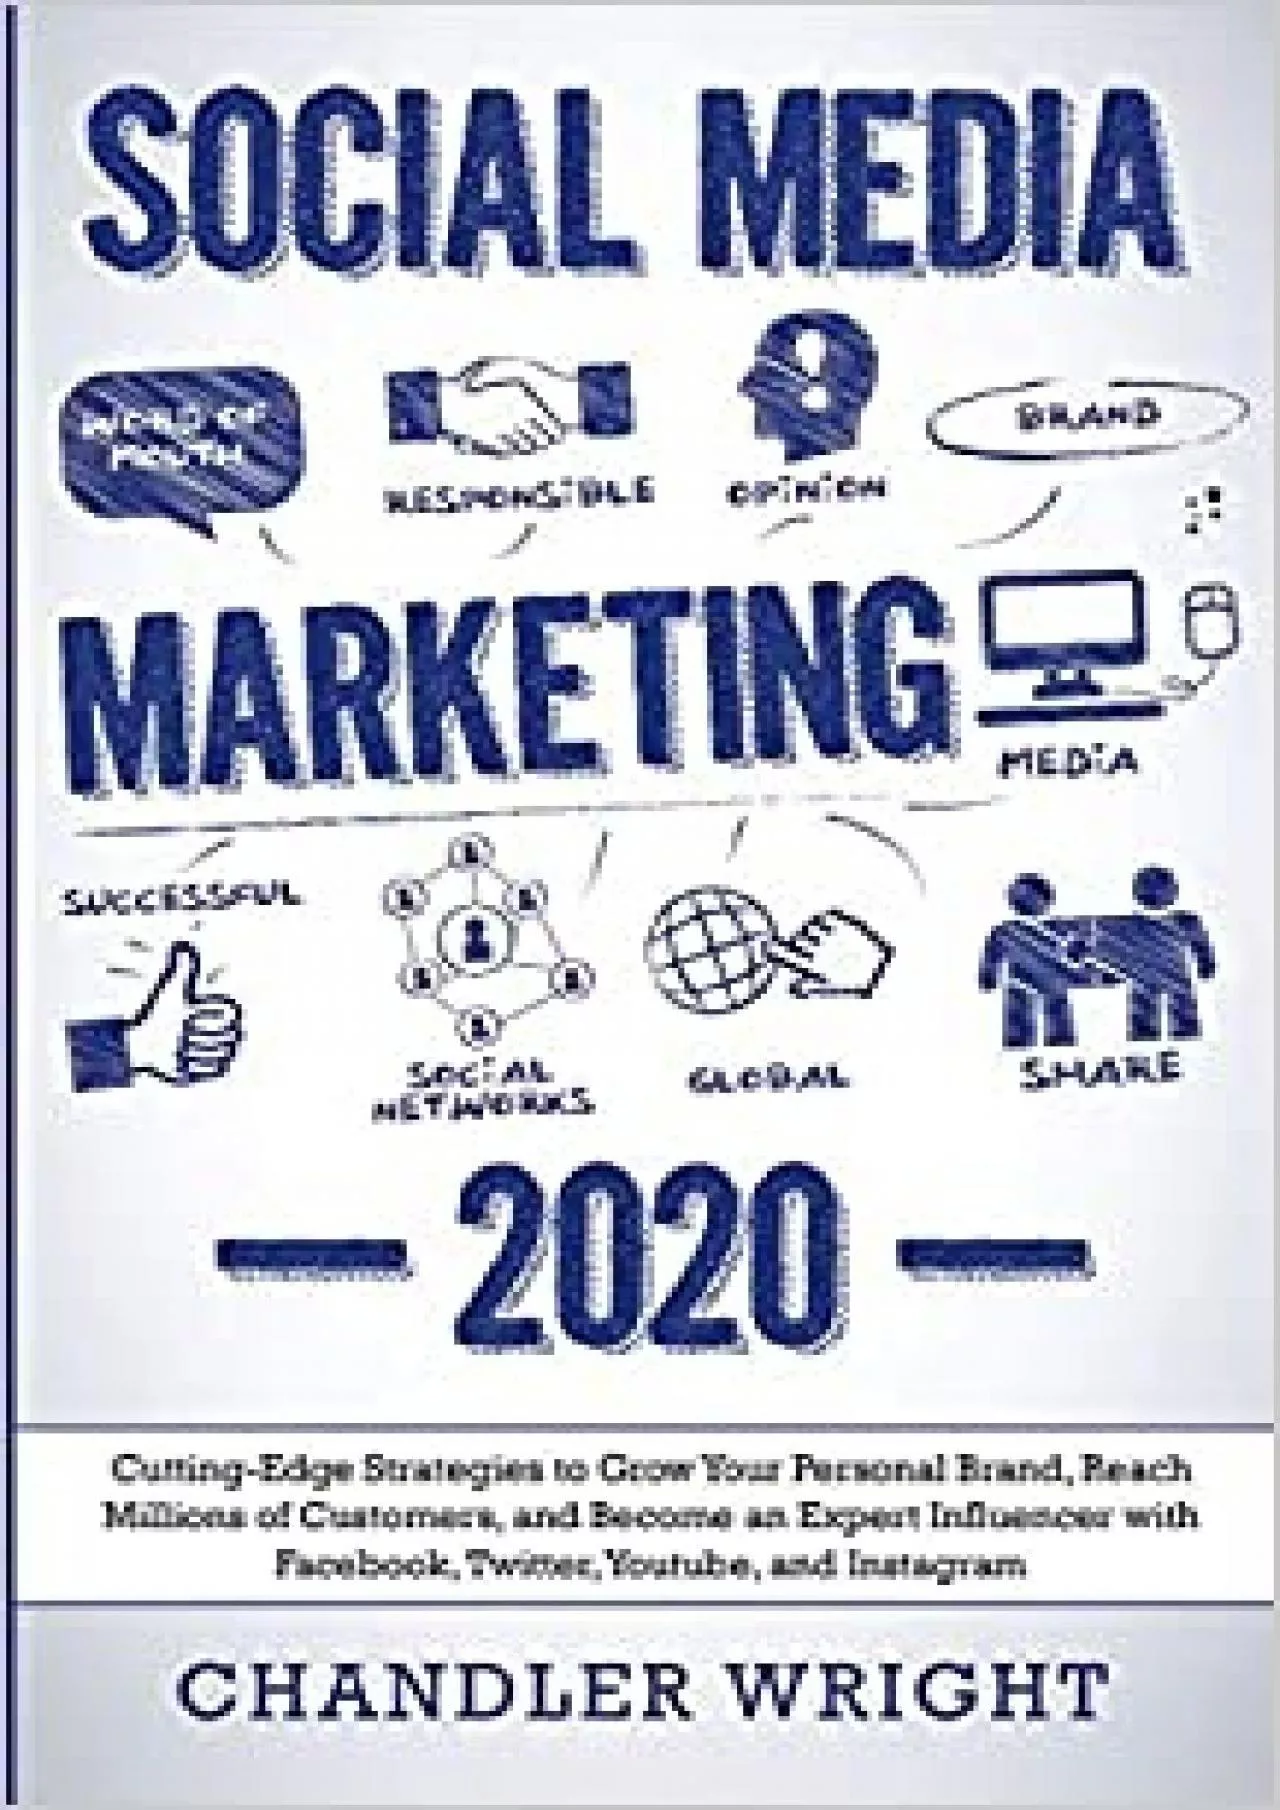 Social Media Marketing 2020 - Cutting-Edge Strategies to Grow Your Personal Brand, Reach